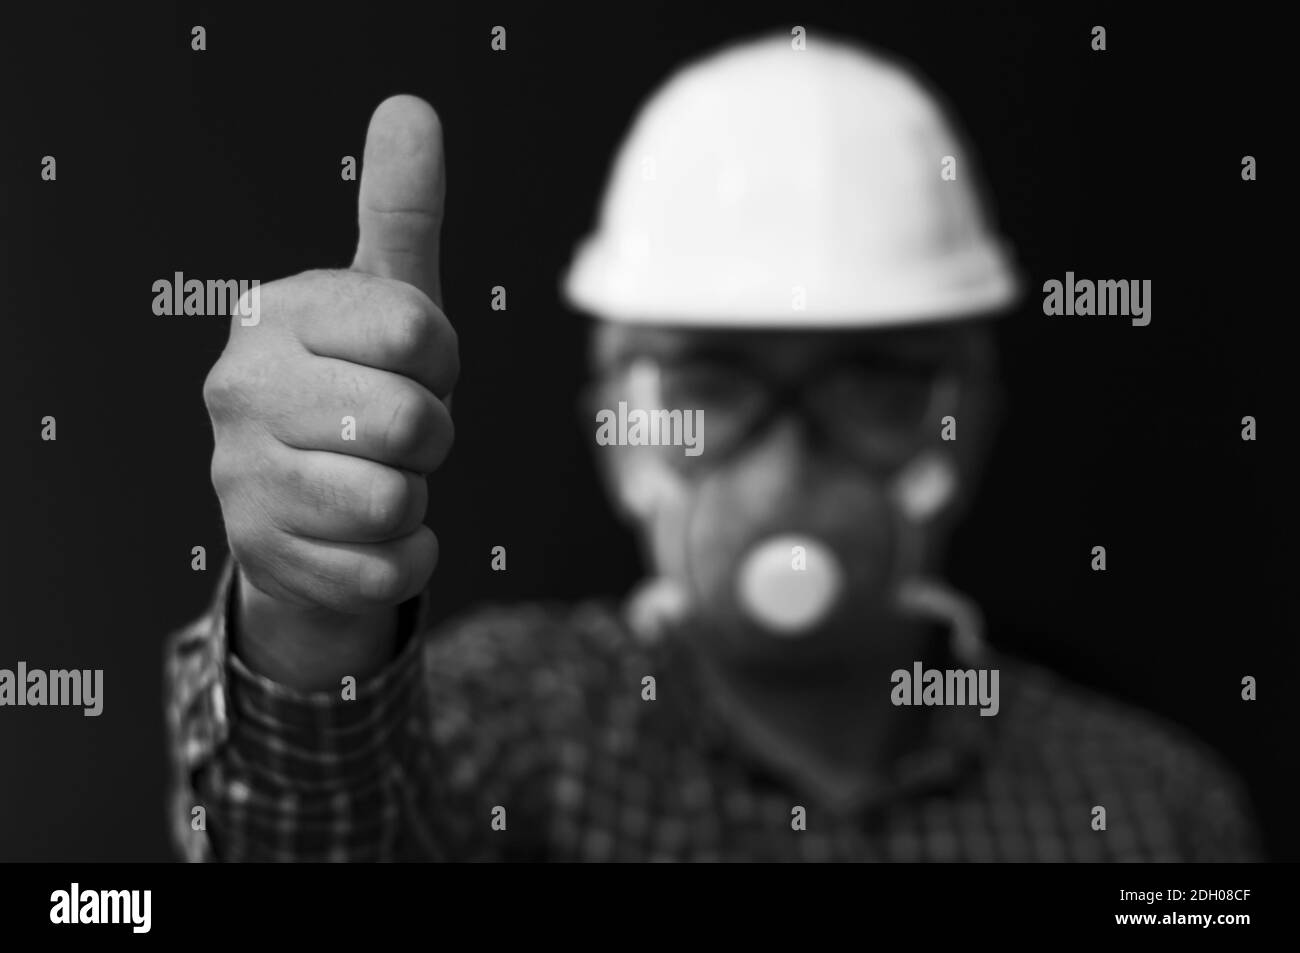 Positive emotion, worker shows thumbs up Stock Photo